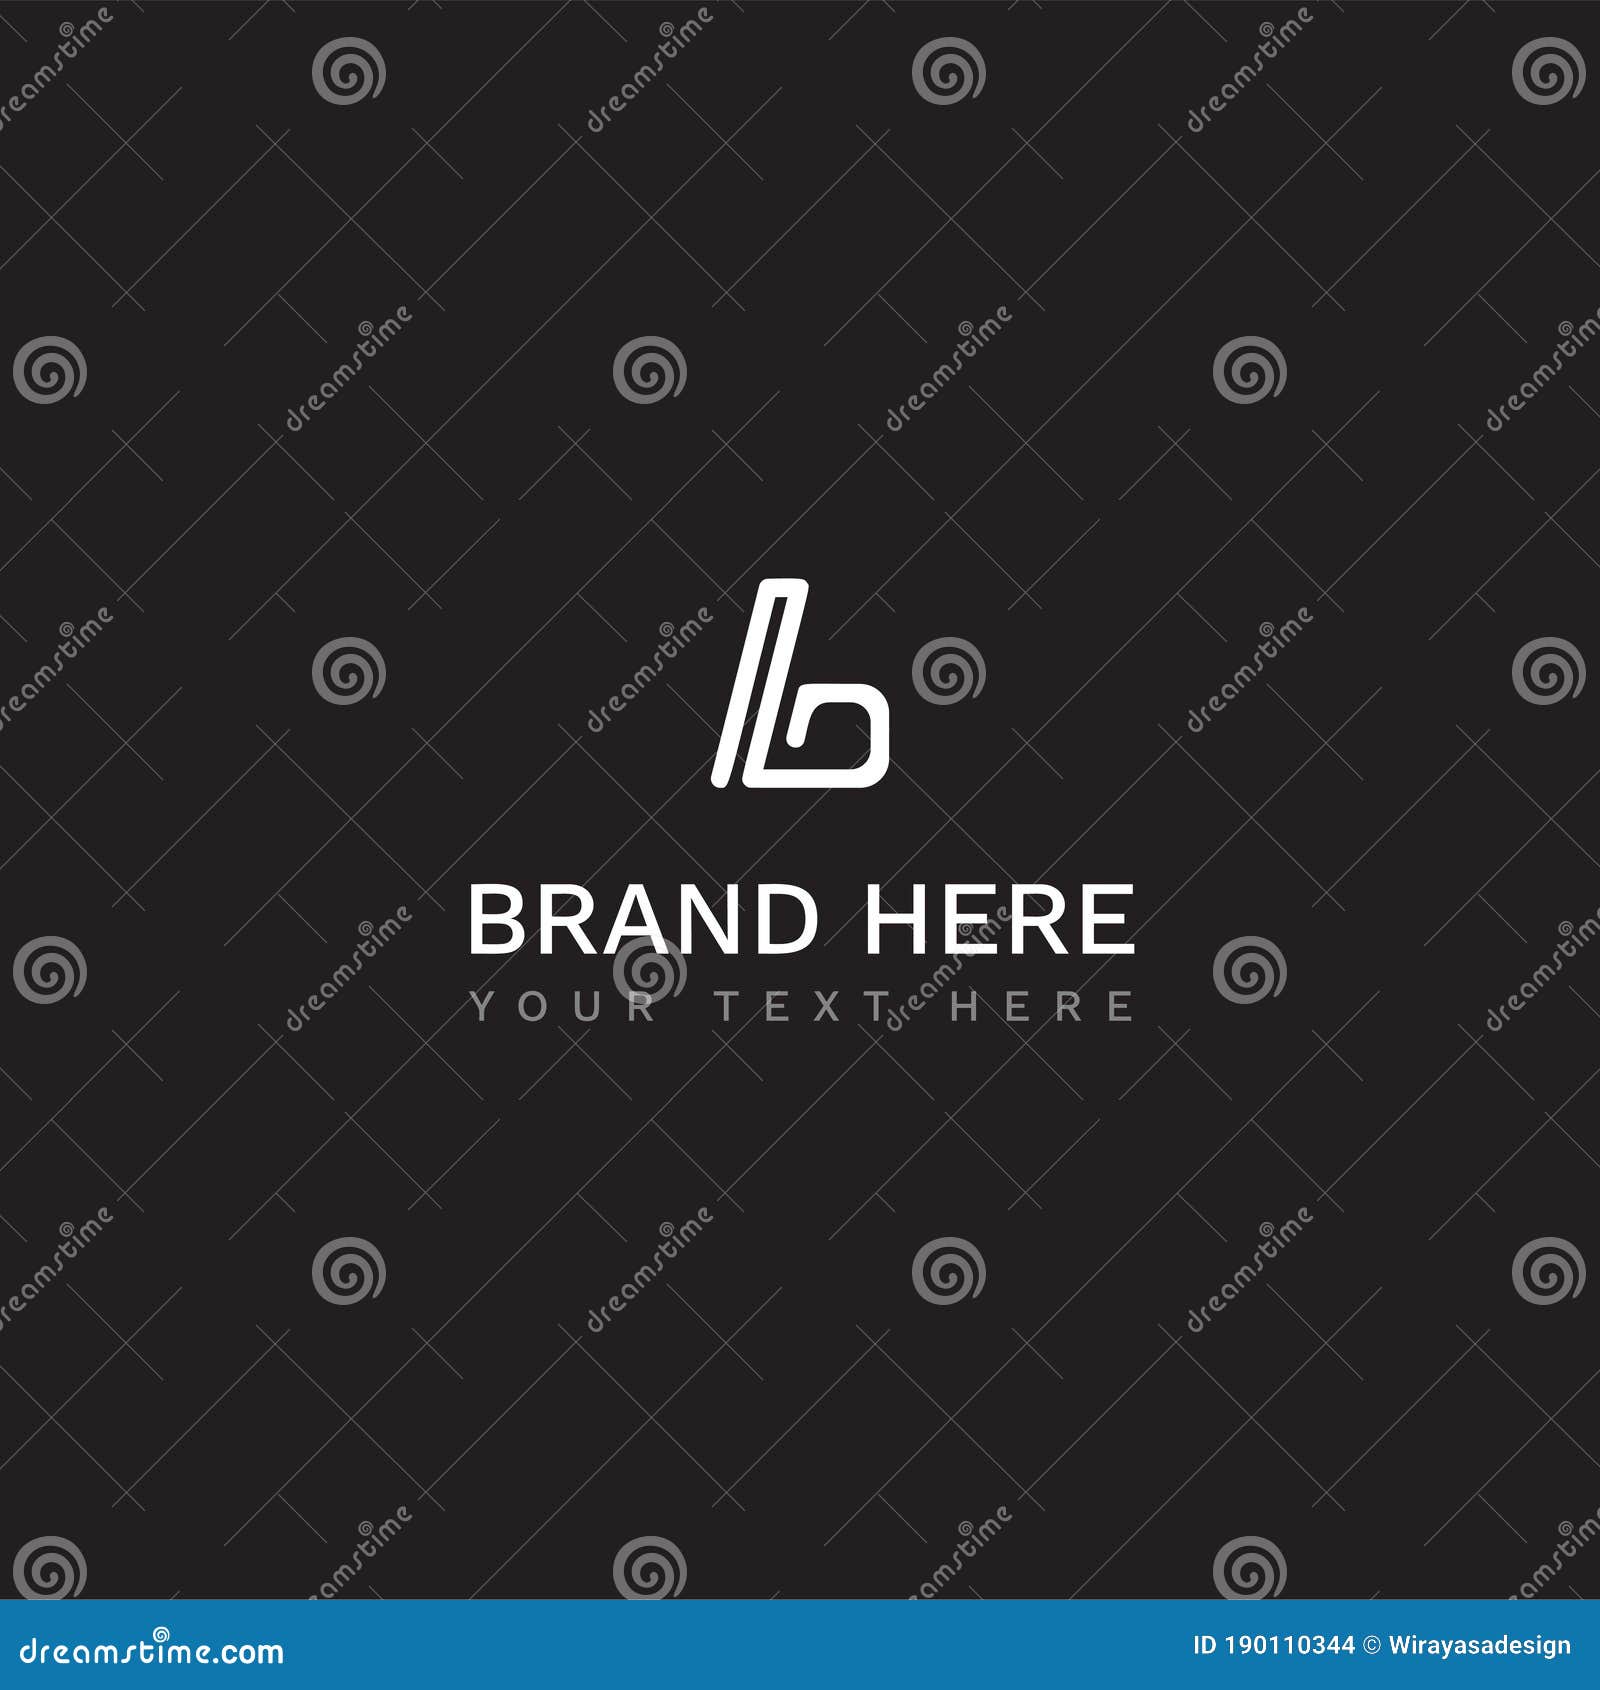 Design Logo Abstract Letter B Logo Can Be Used For Business Edit The Brand Name Line Etc This Logo Can Editable With Stock Illustration Illustration Of Business Card